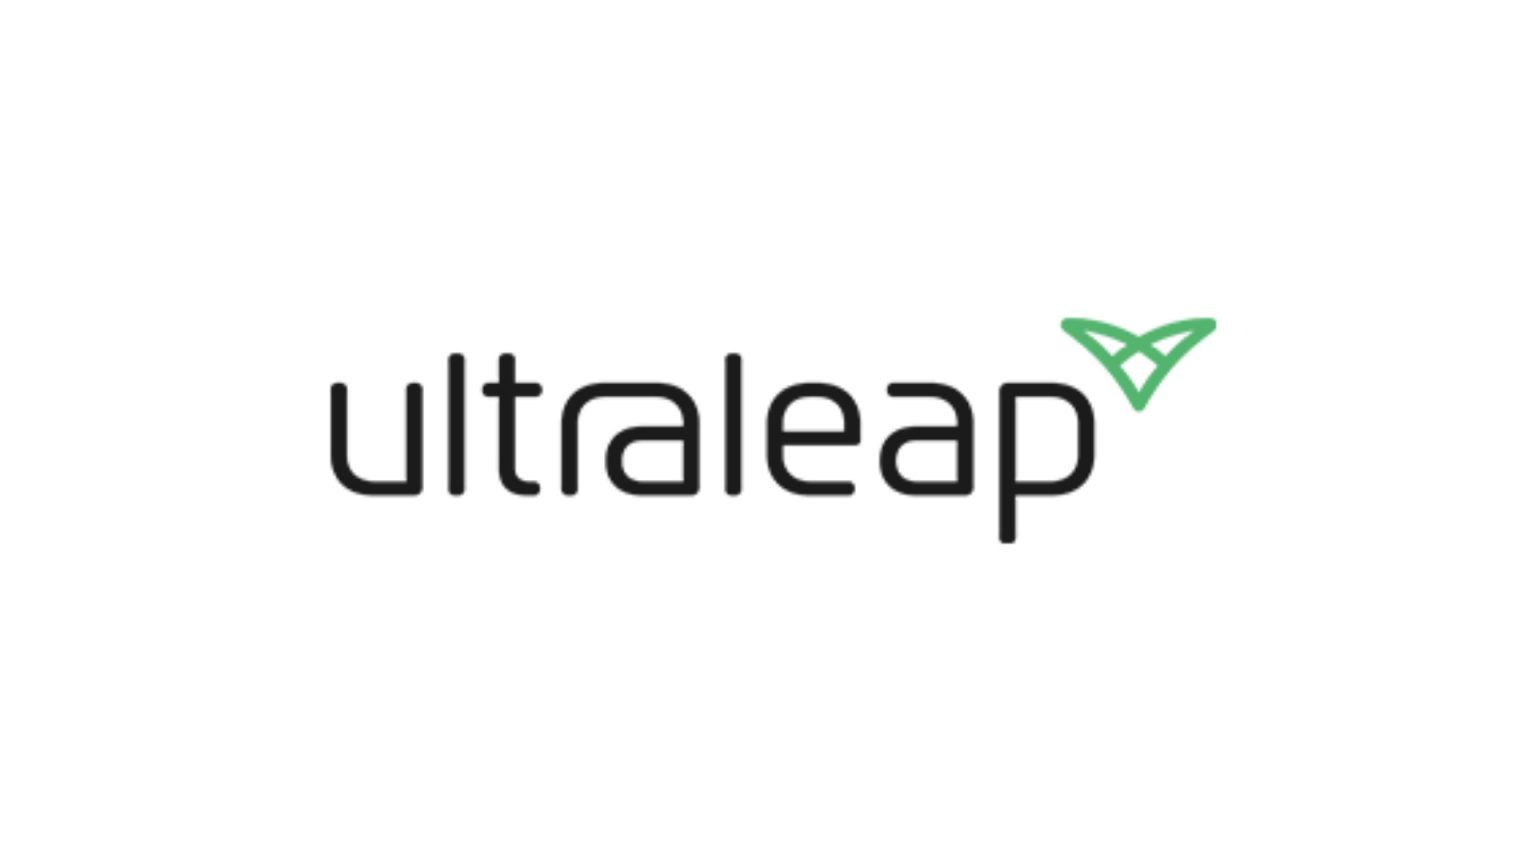 Ultraleap, which develops ultrasound-based hand tracking tech and touchless interfaces for VR/XR headsets, raises an $82M Series D from Tencent and others (Mike Butcher/TechCrunch)